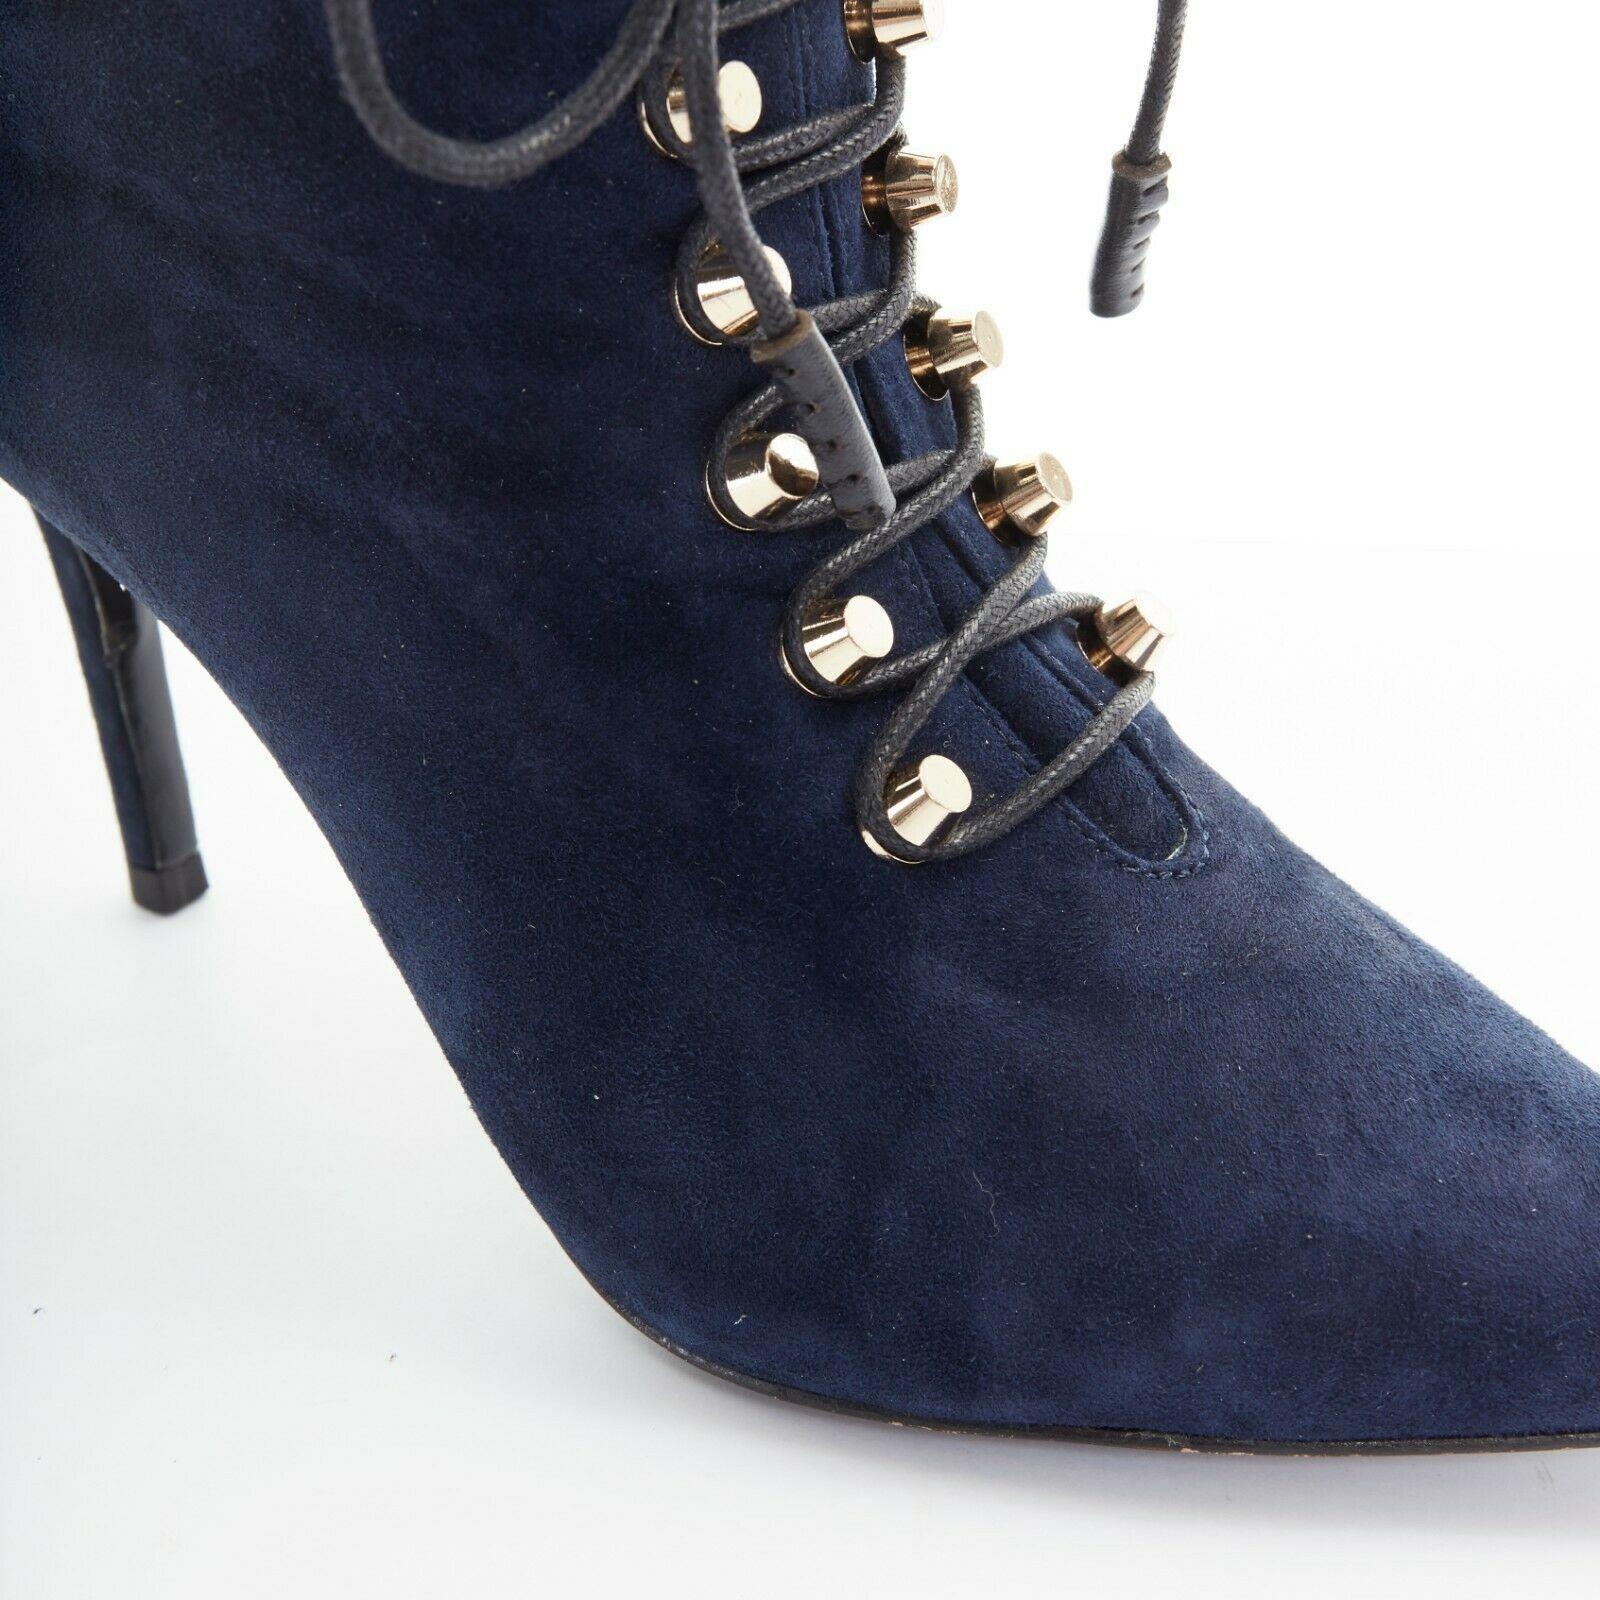 Women's BALENCIAGA navy blue suede gold-tone stud lace up point toe ankle bootie EU37